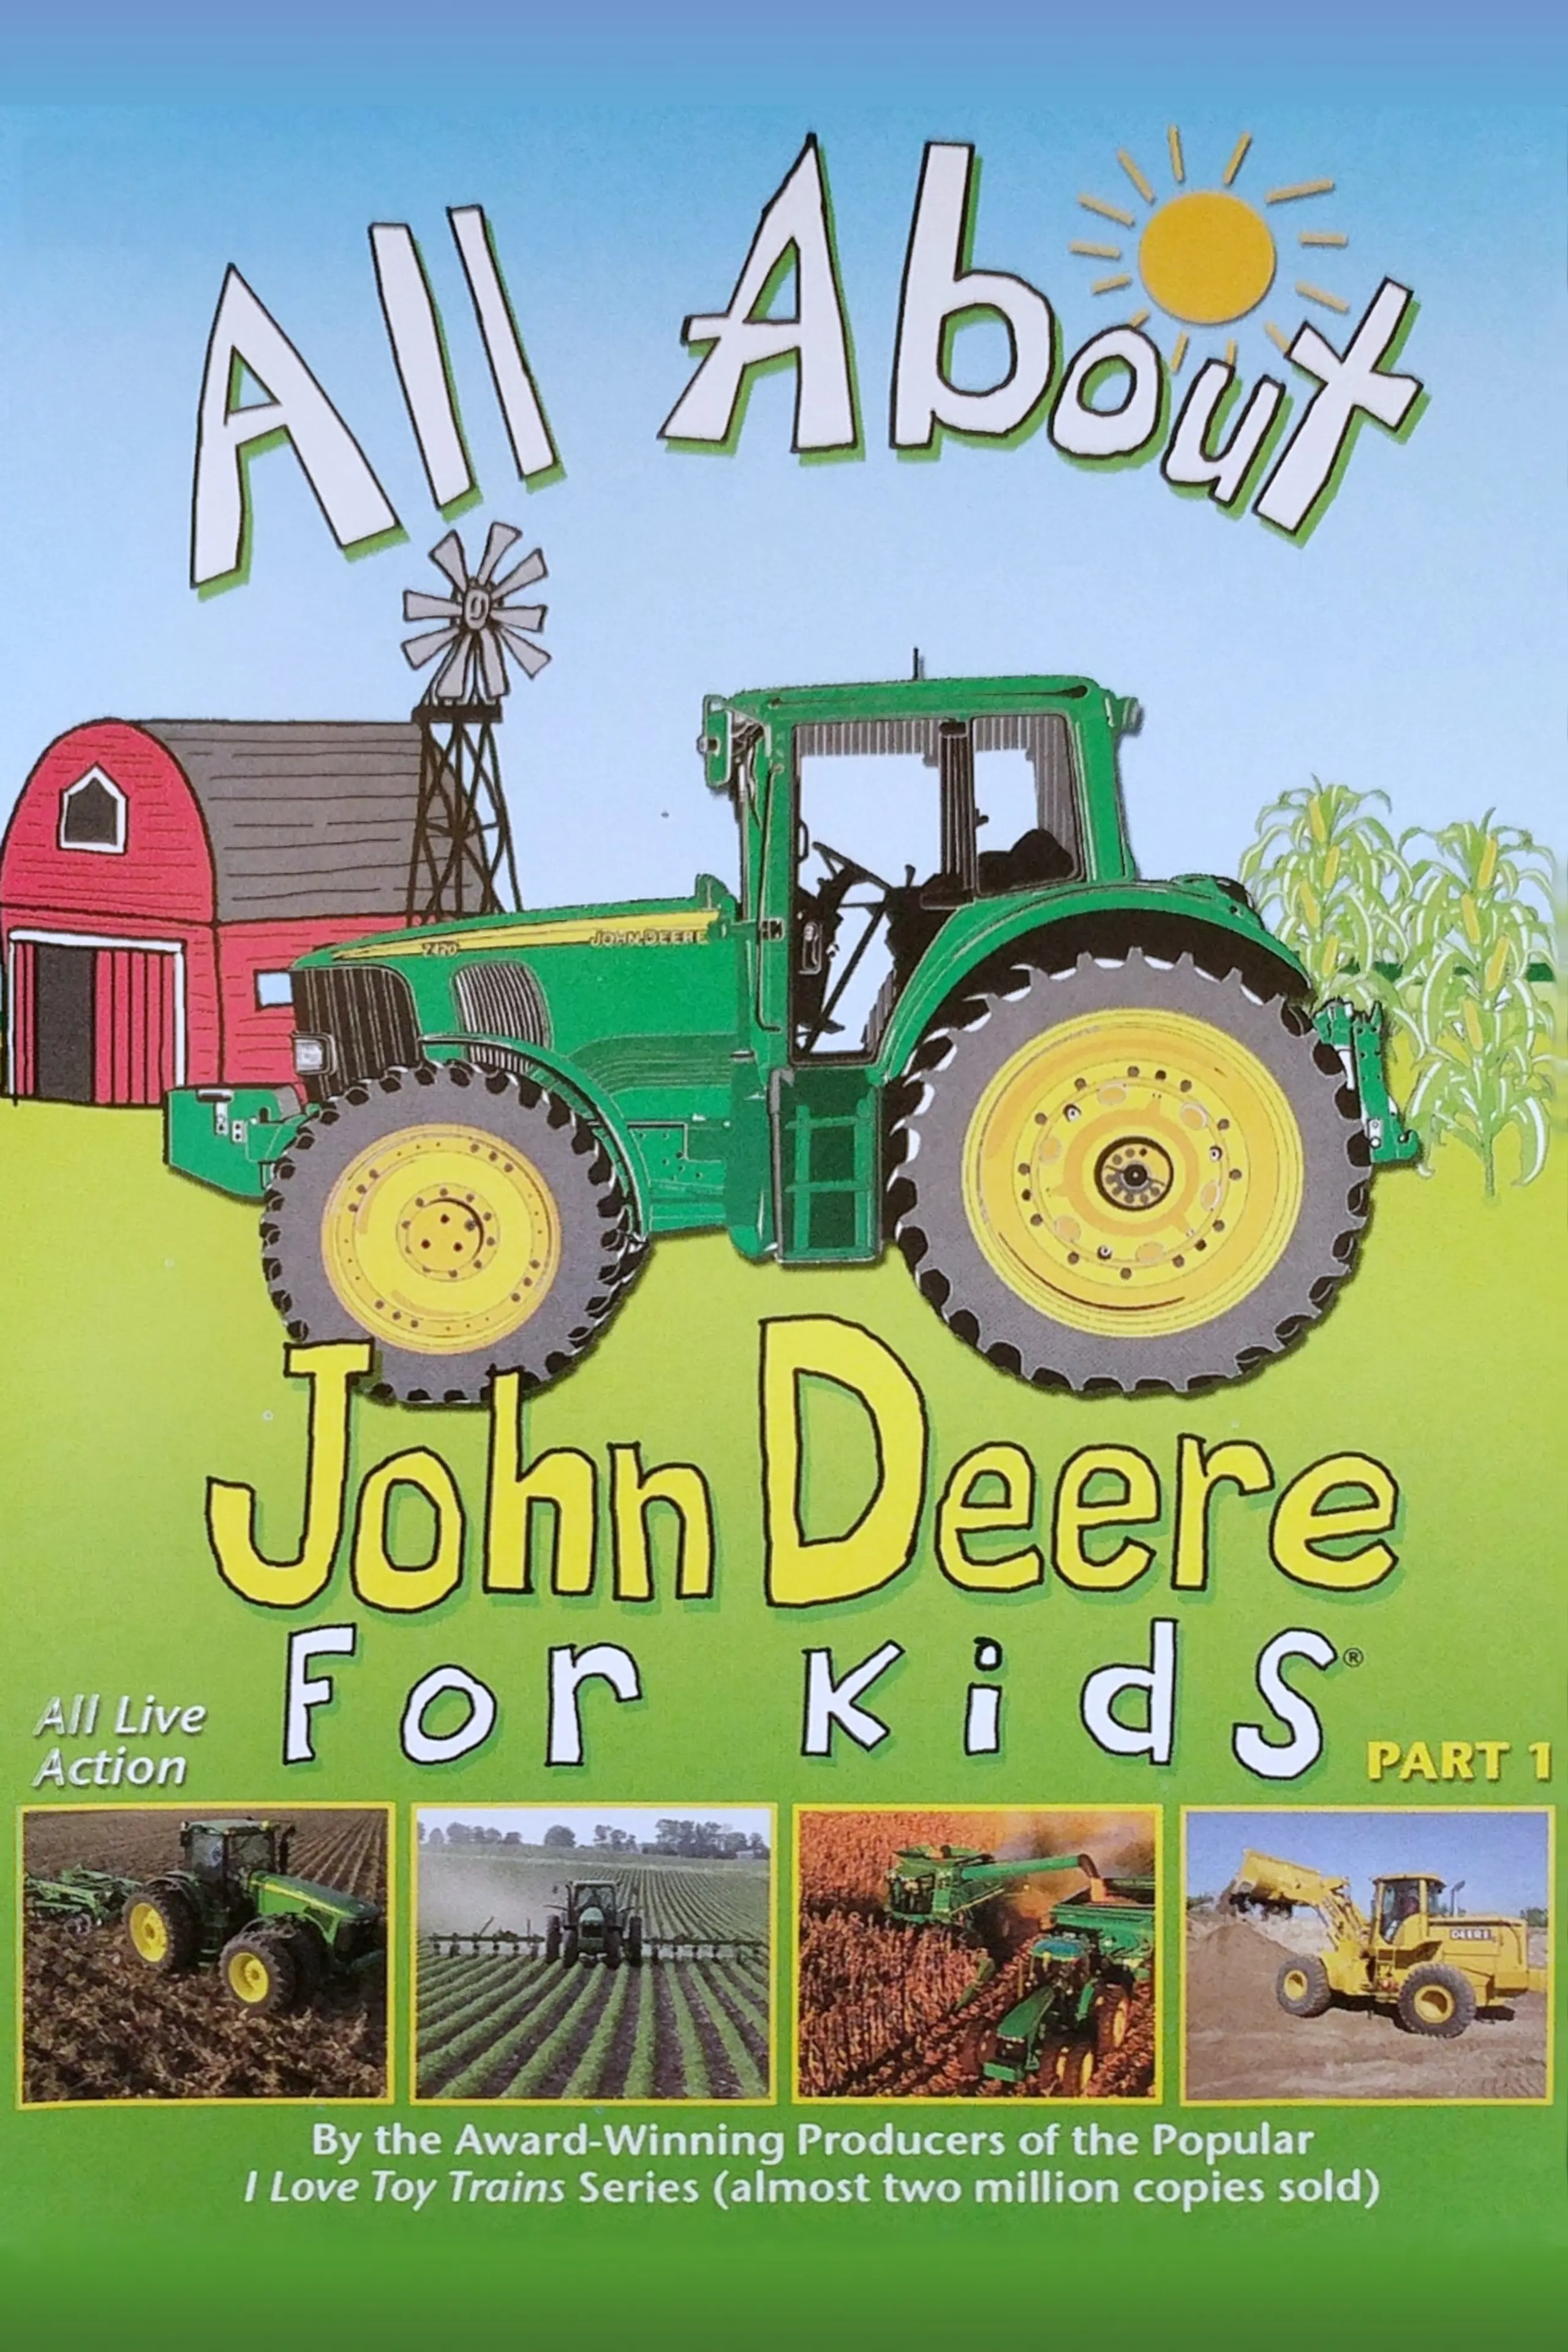 All About John Deere for Kids, Part 1